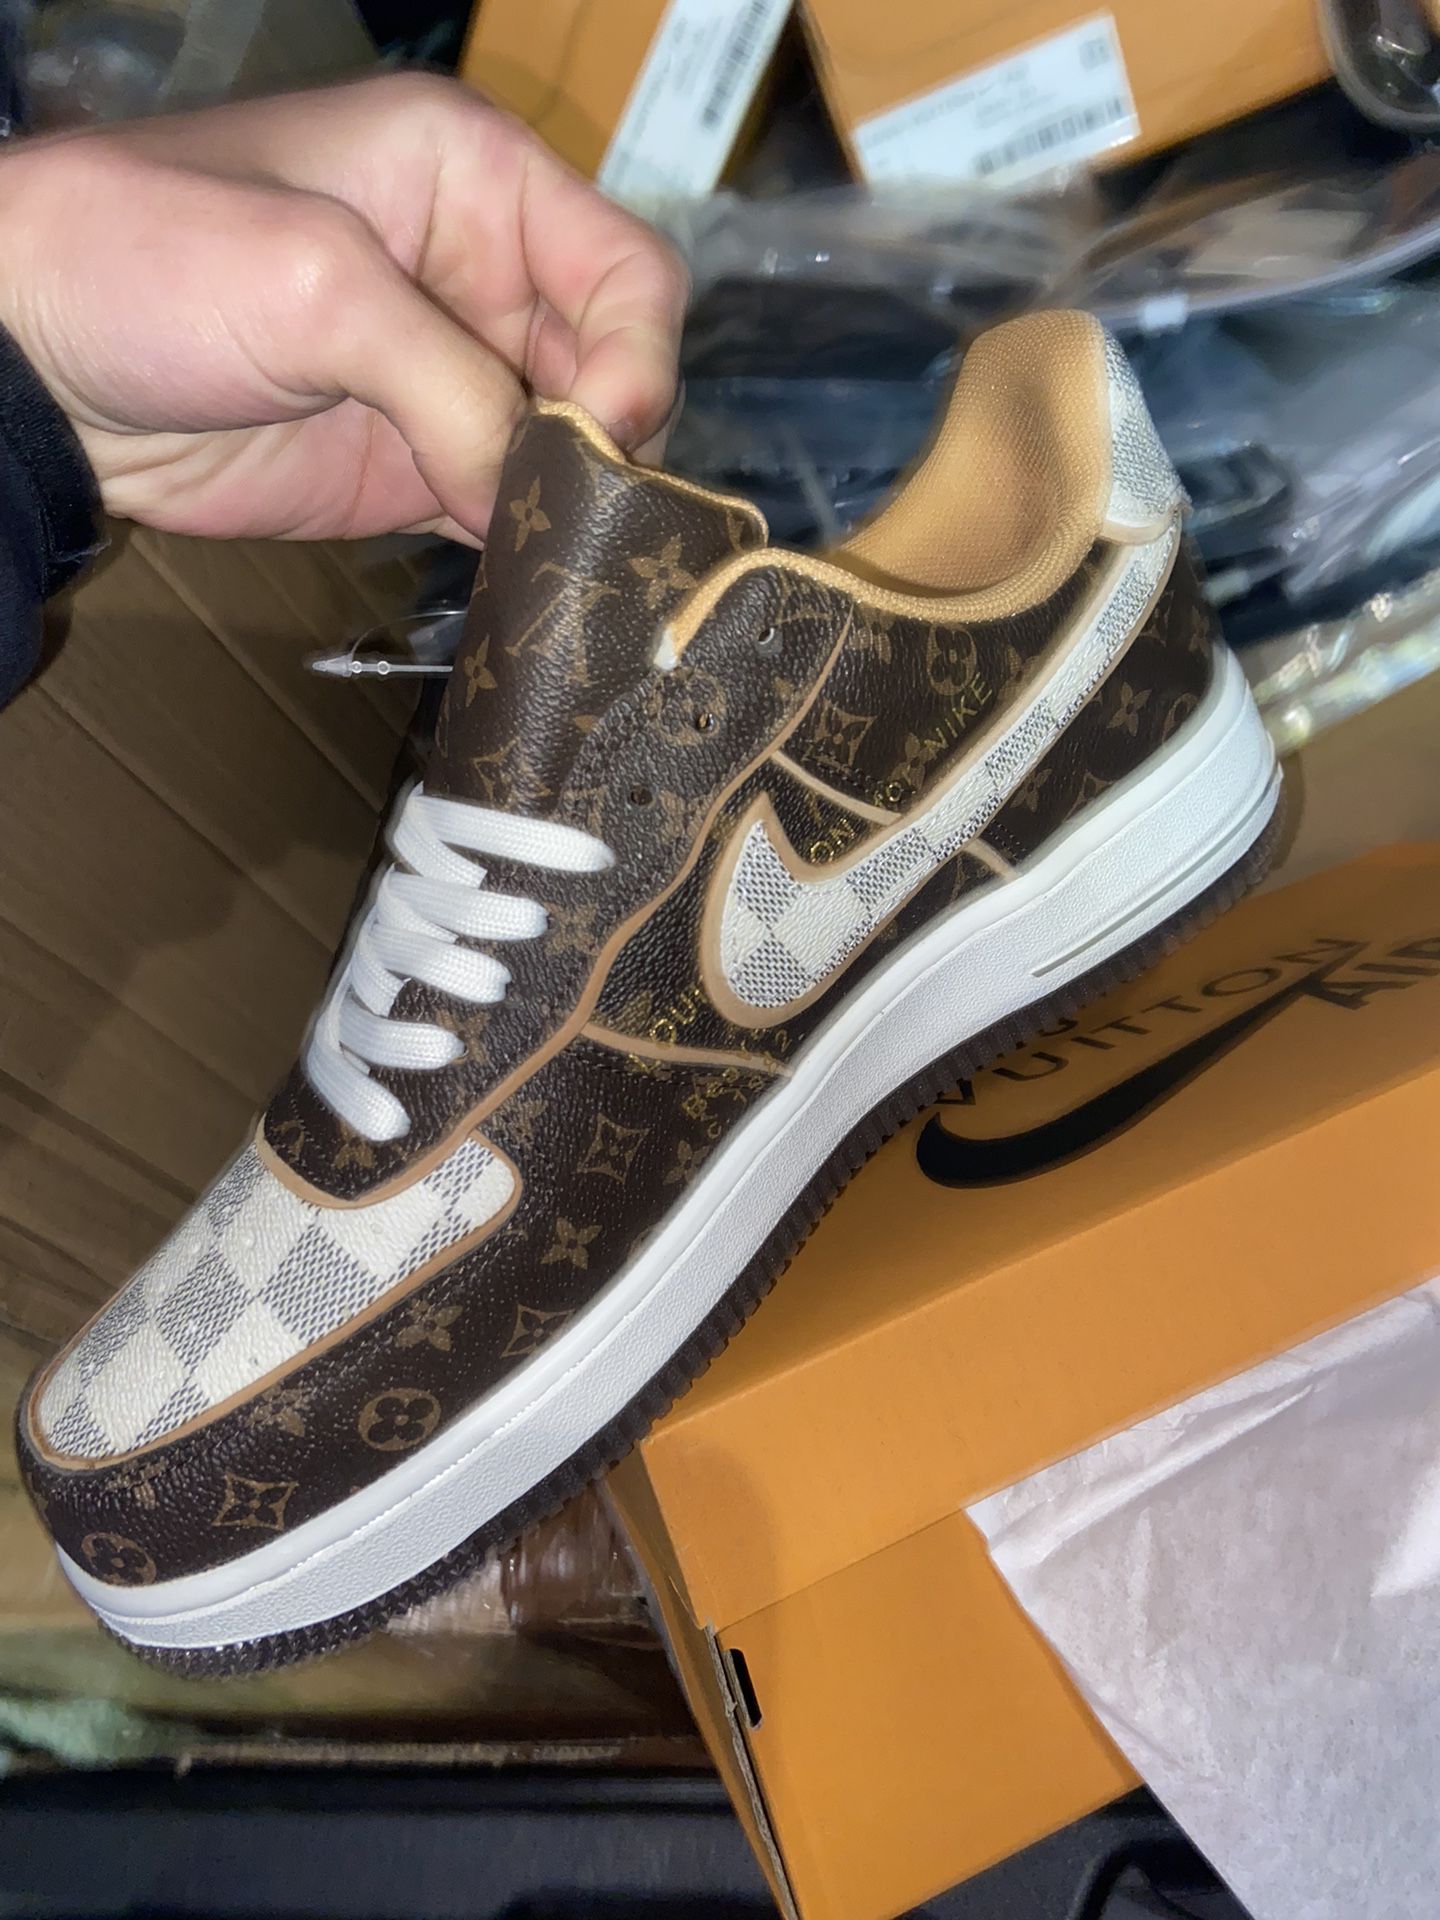 Louis Vuitton X Nike Air Force 1 for Sale in Los Angeles, CA - OfferUp